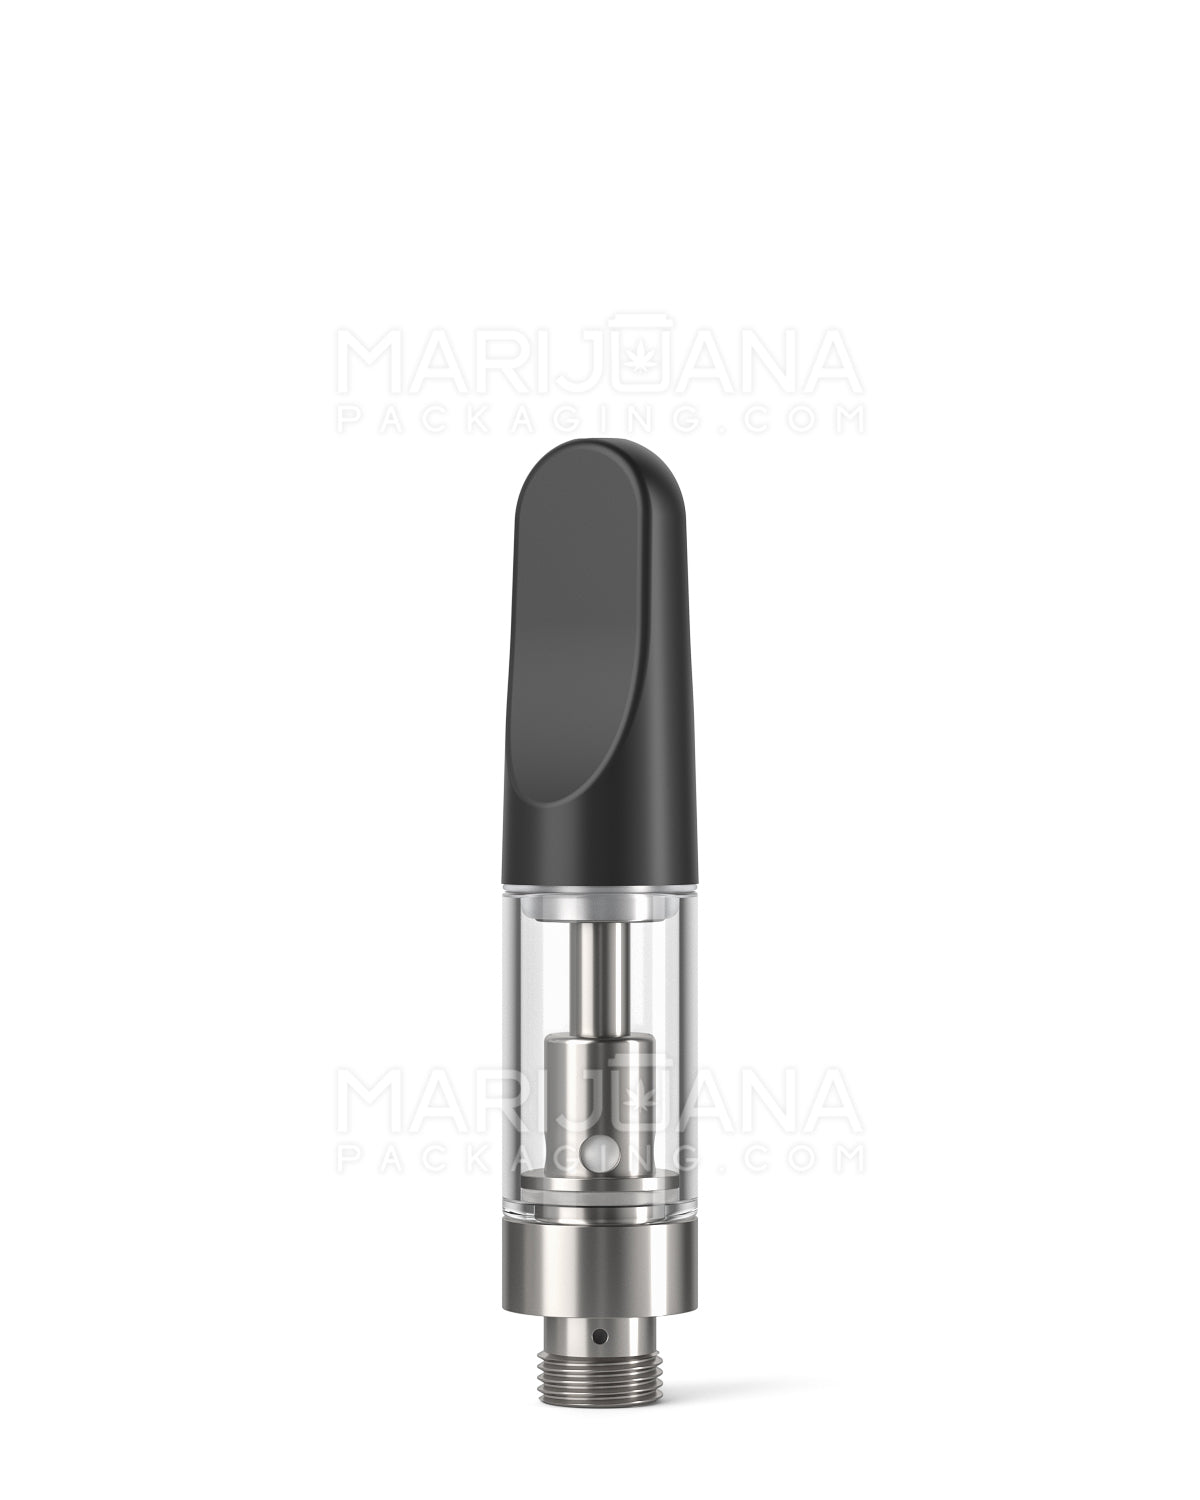 CCELL | Liquid6 Reactor Glass Vape Cartridge with Black Plastic Mouthpiece | 0.5mL - Screw On - 100 Count - 1